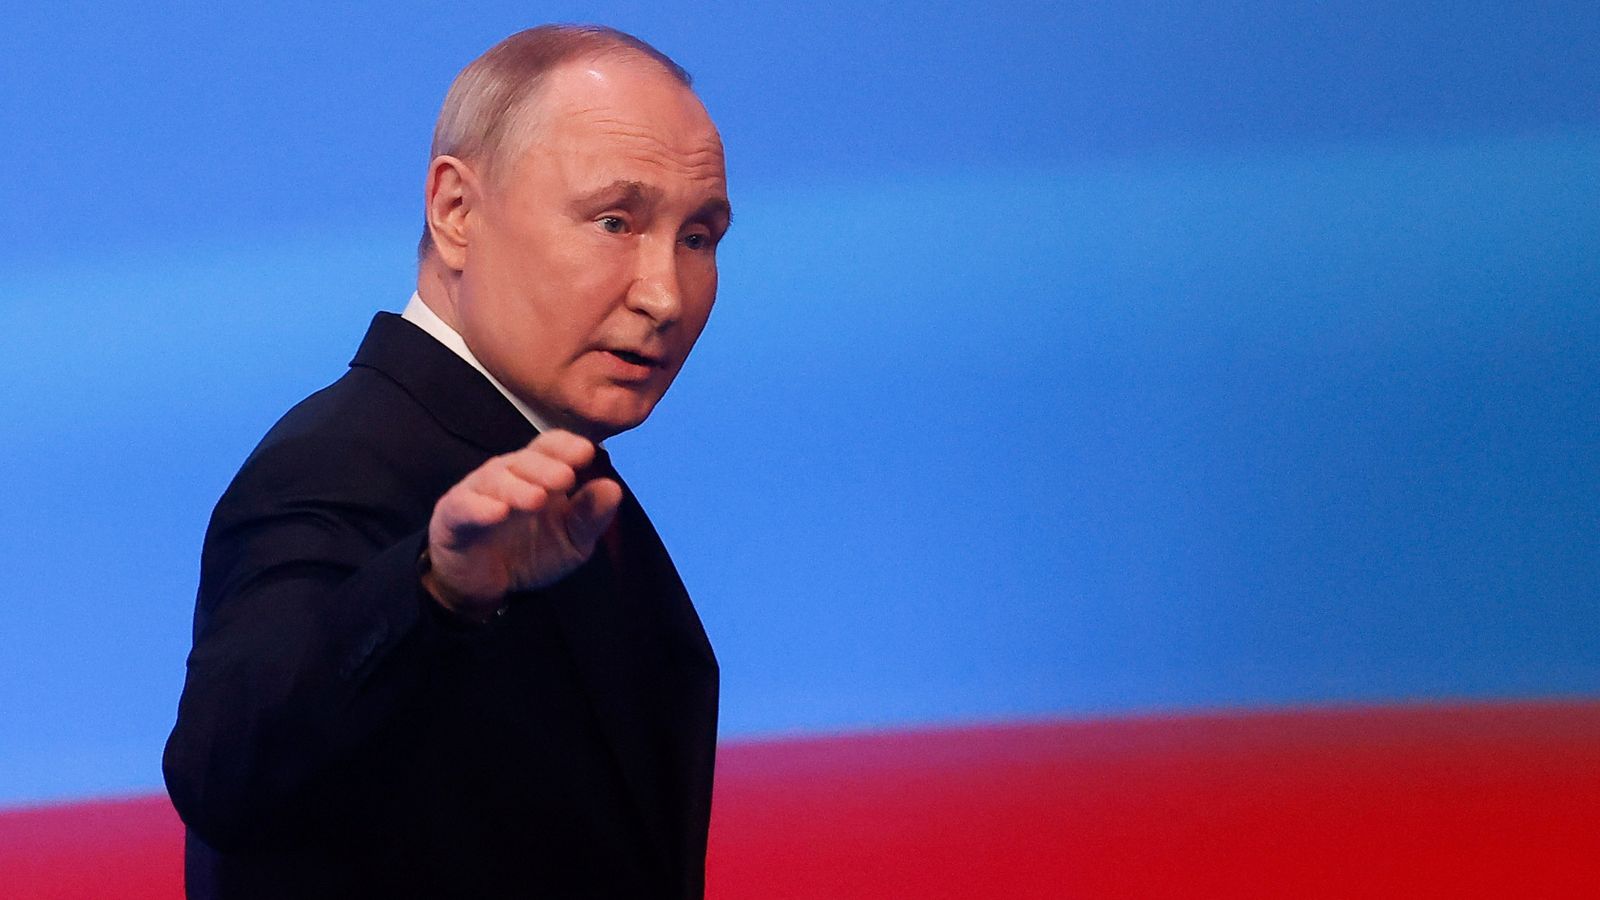 Putin extends his rule after an unfree and unfair election - so what's next?